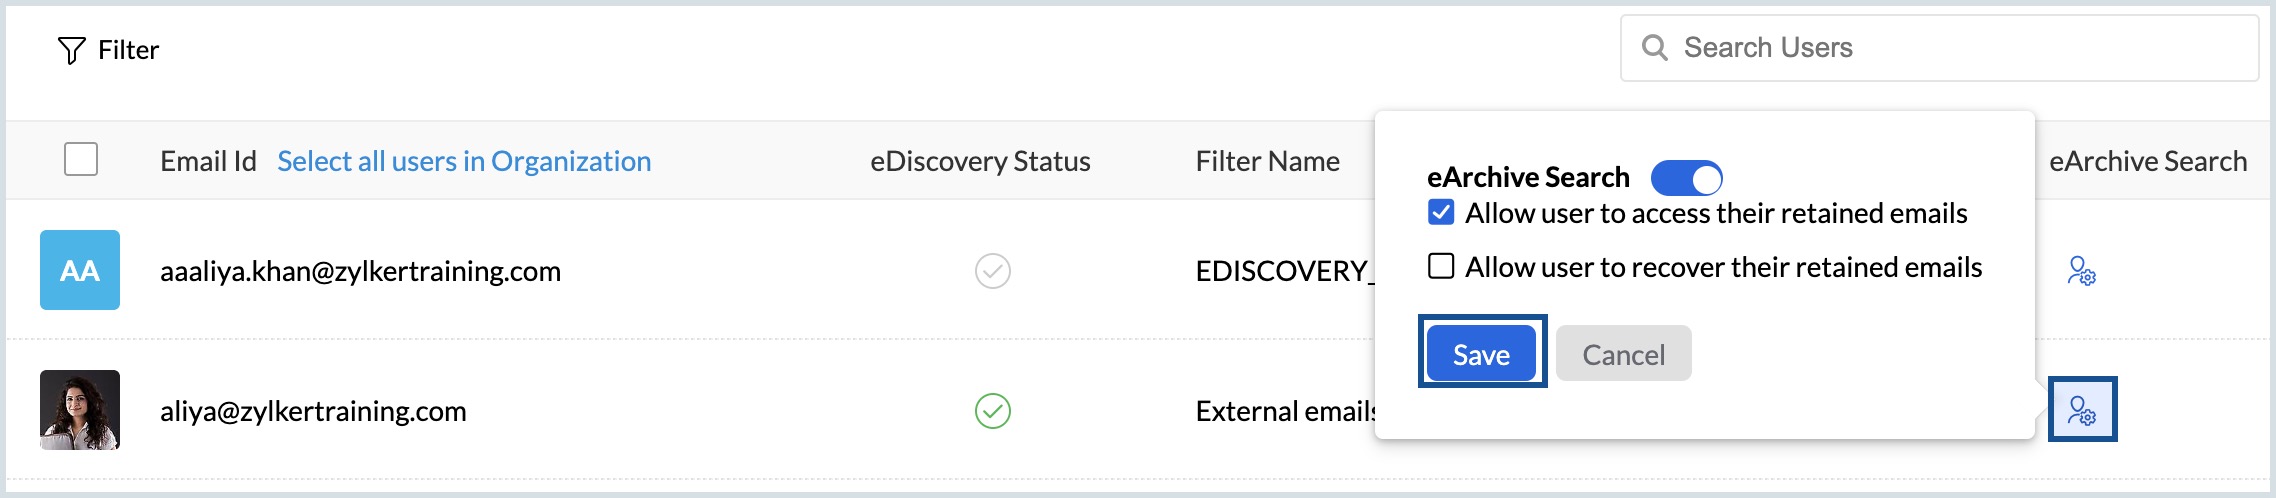 enable ediscovery for users in mailbox